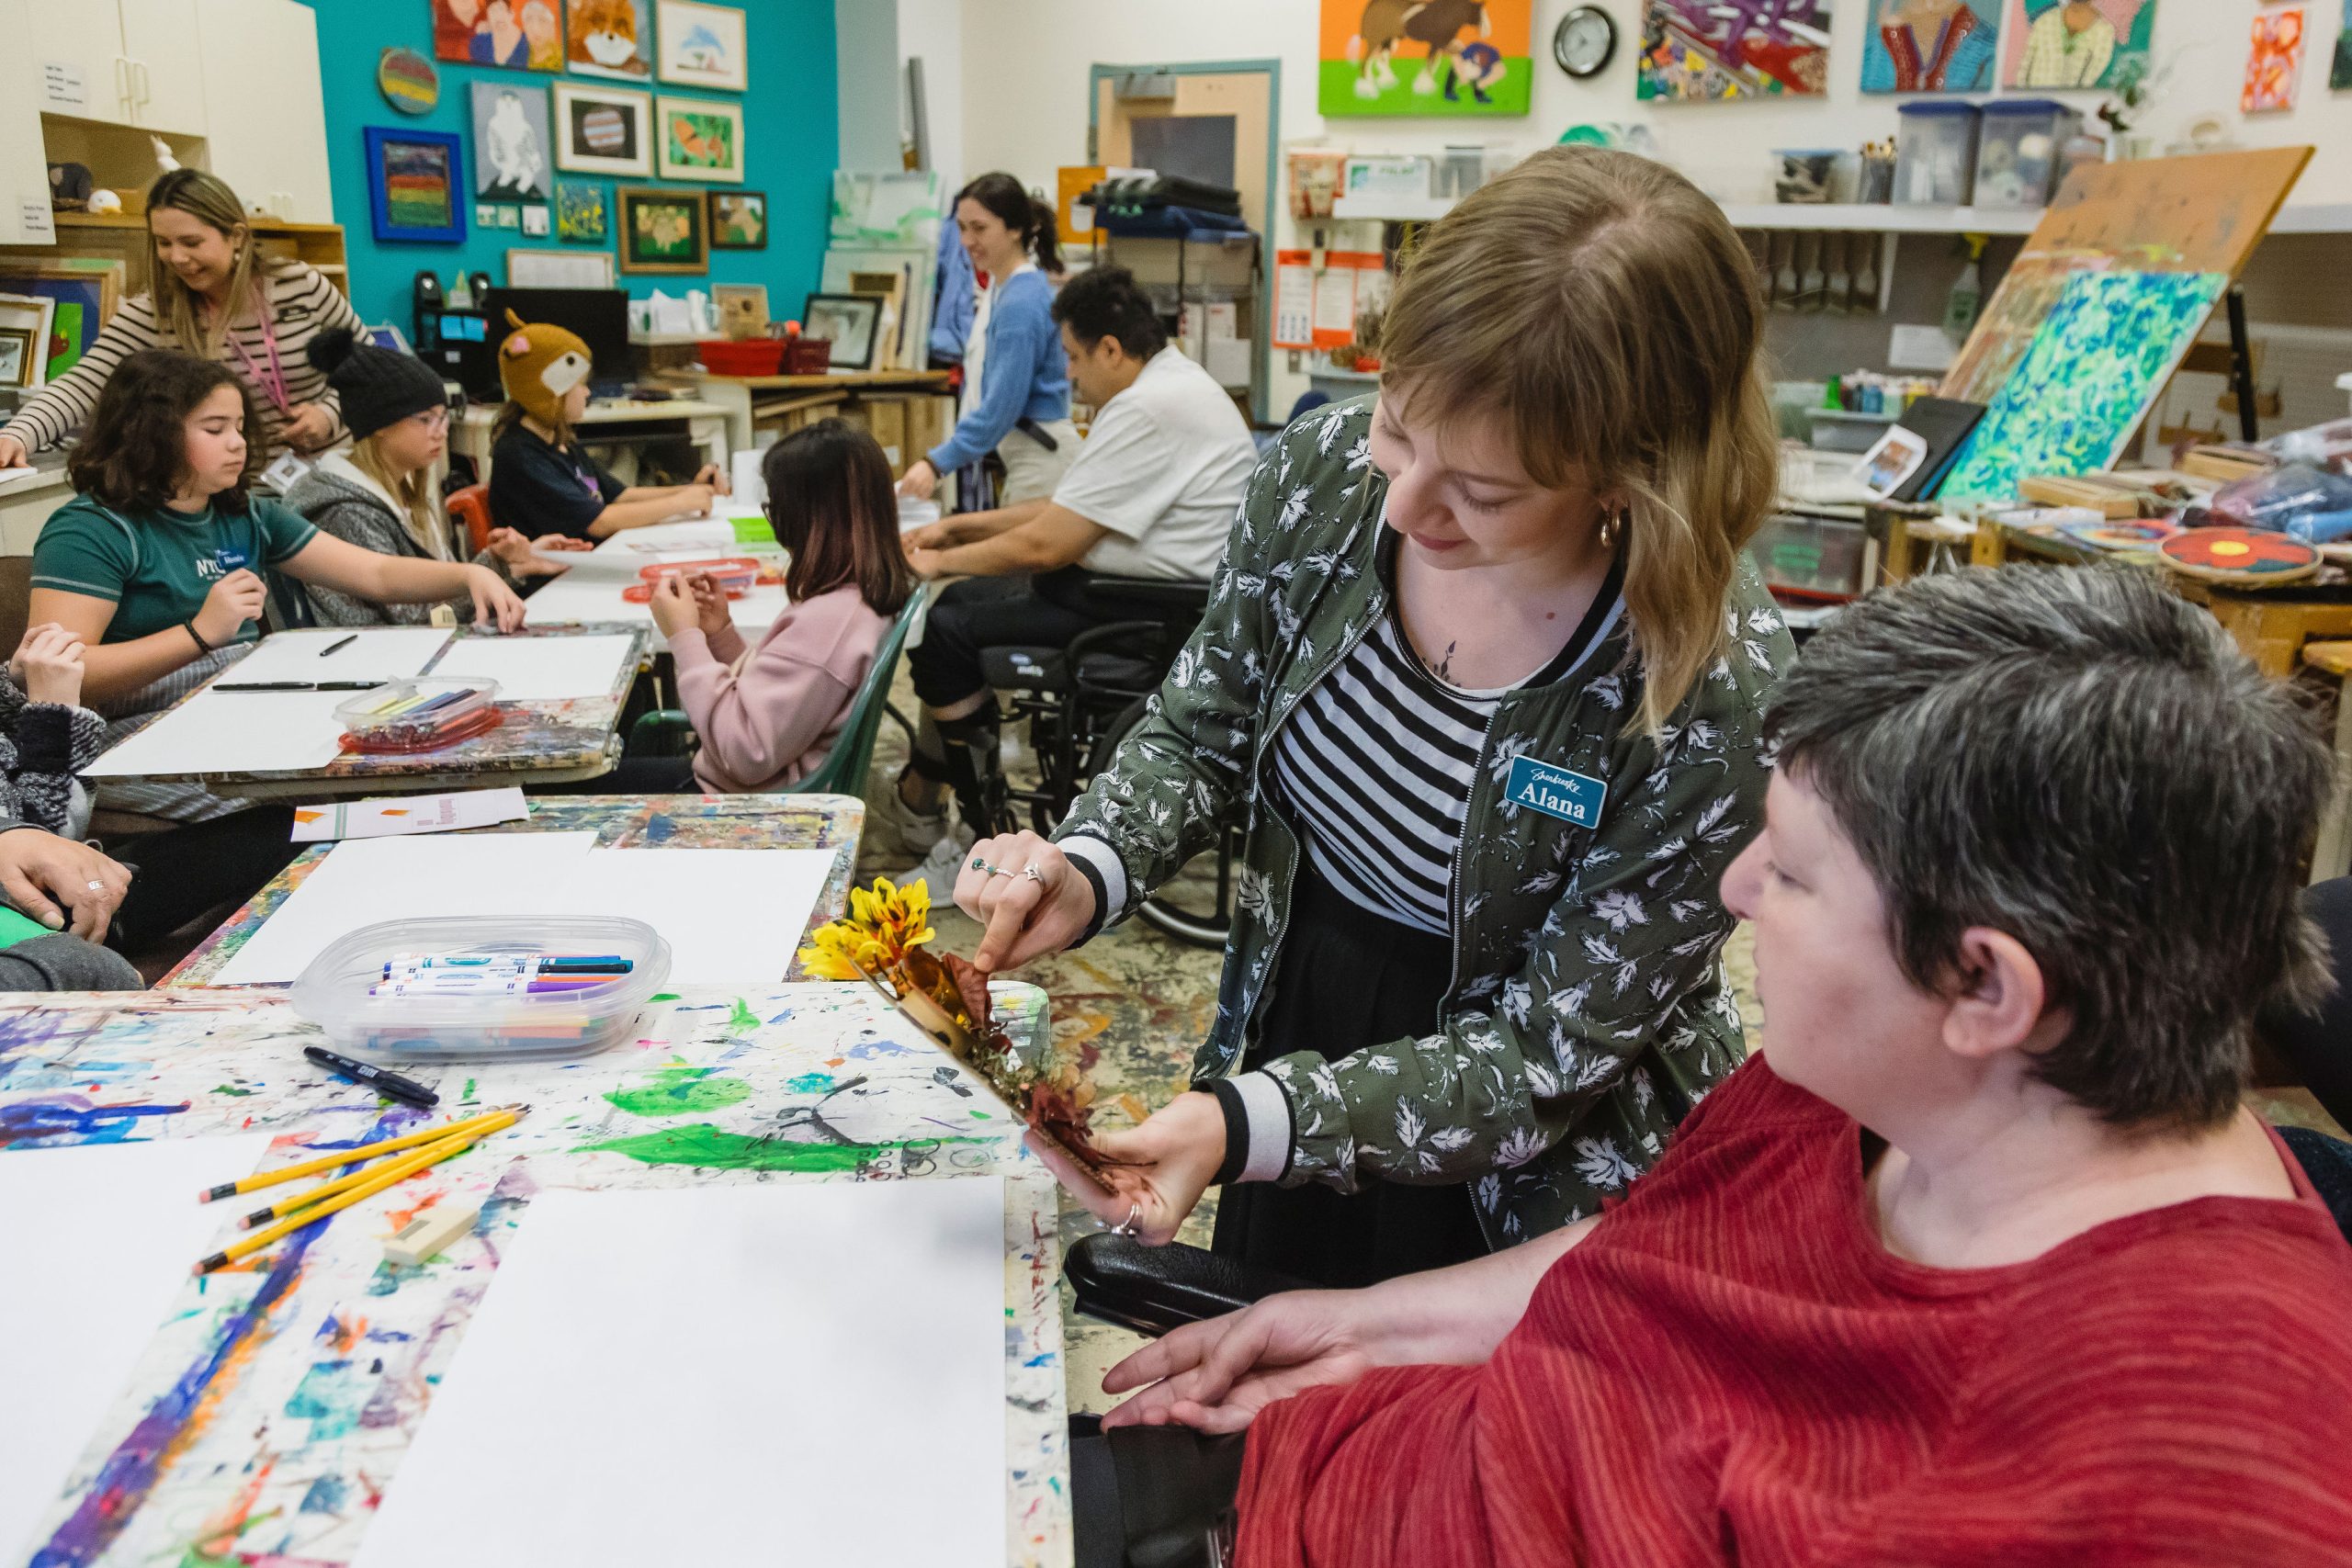 A senior and a staff member make art together at Sherbrooke Community Centre.